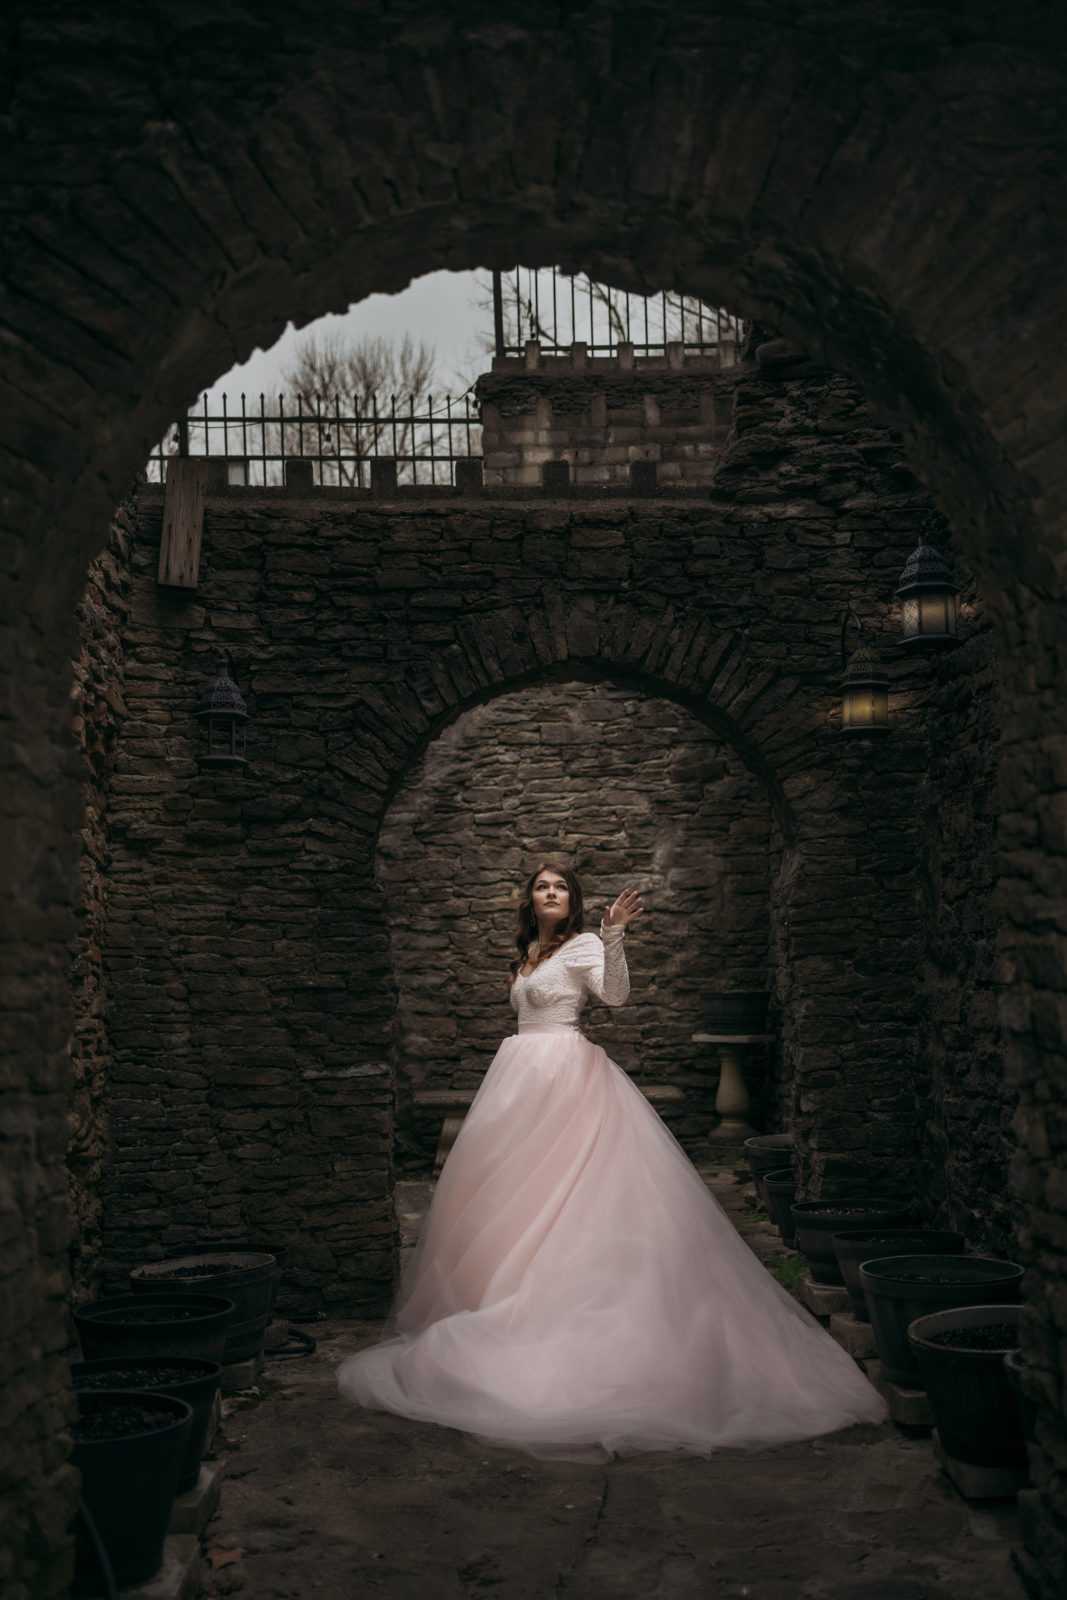 Loveland Castle Senior Session. White lace top with light pink tulle full length skirt. Dramatic lighting with glowing lanterns. 